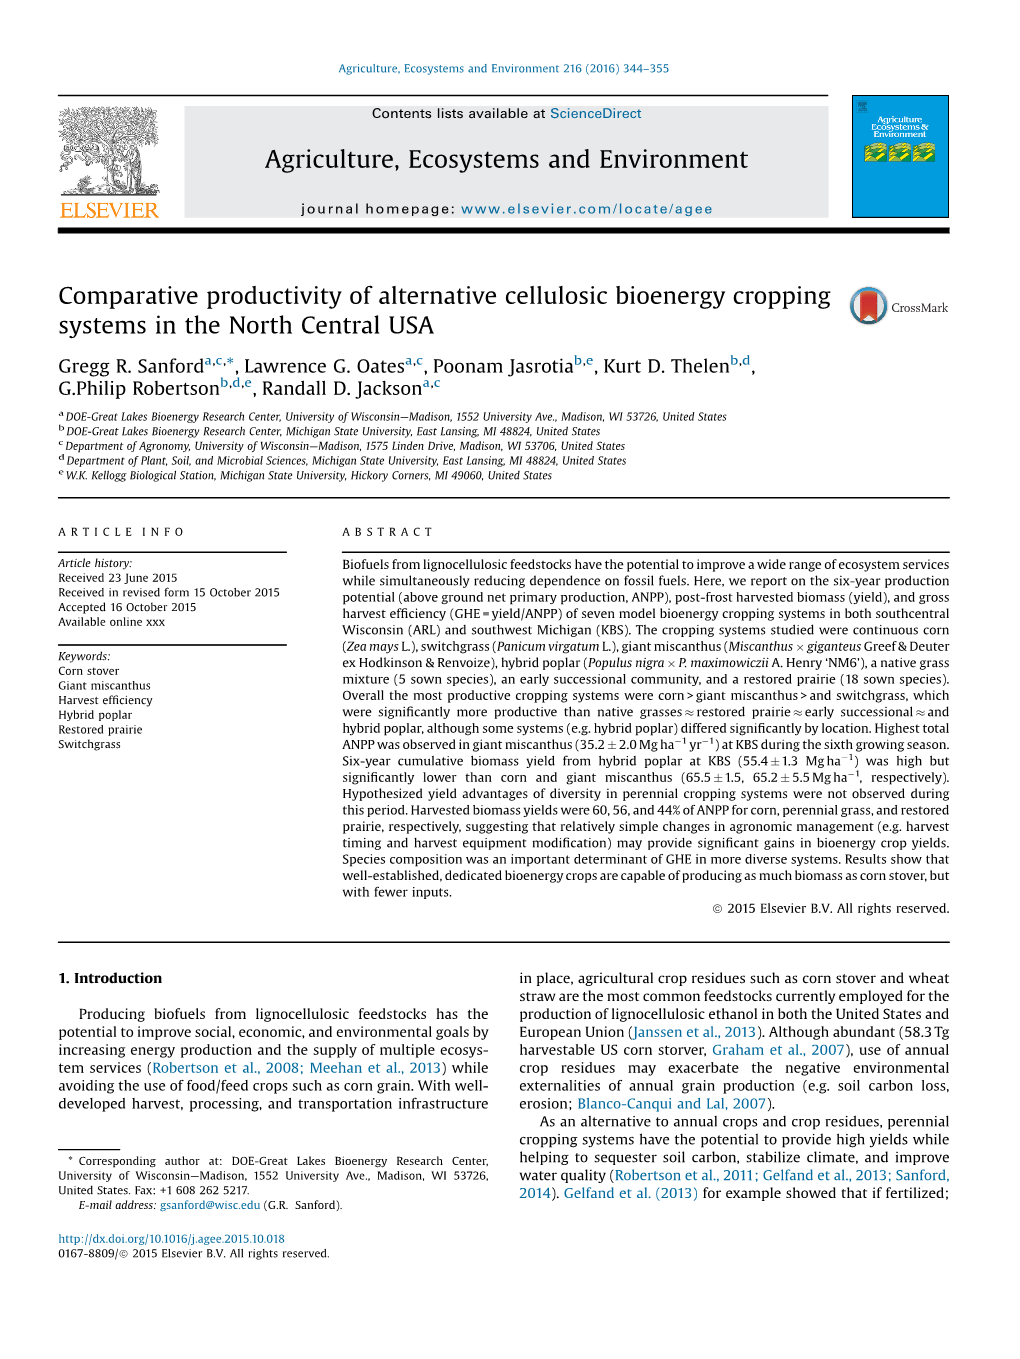 Comparative Productivity of Alternative Cellulosic Bioenergy Cropping